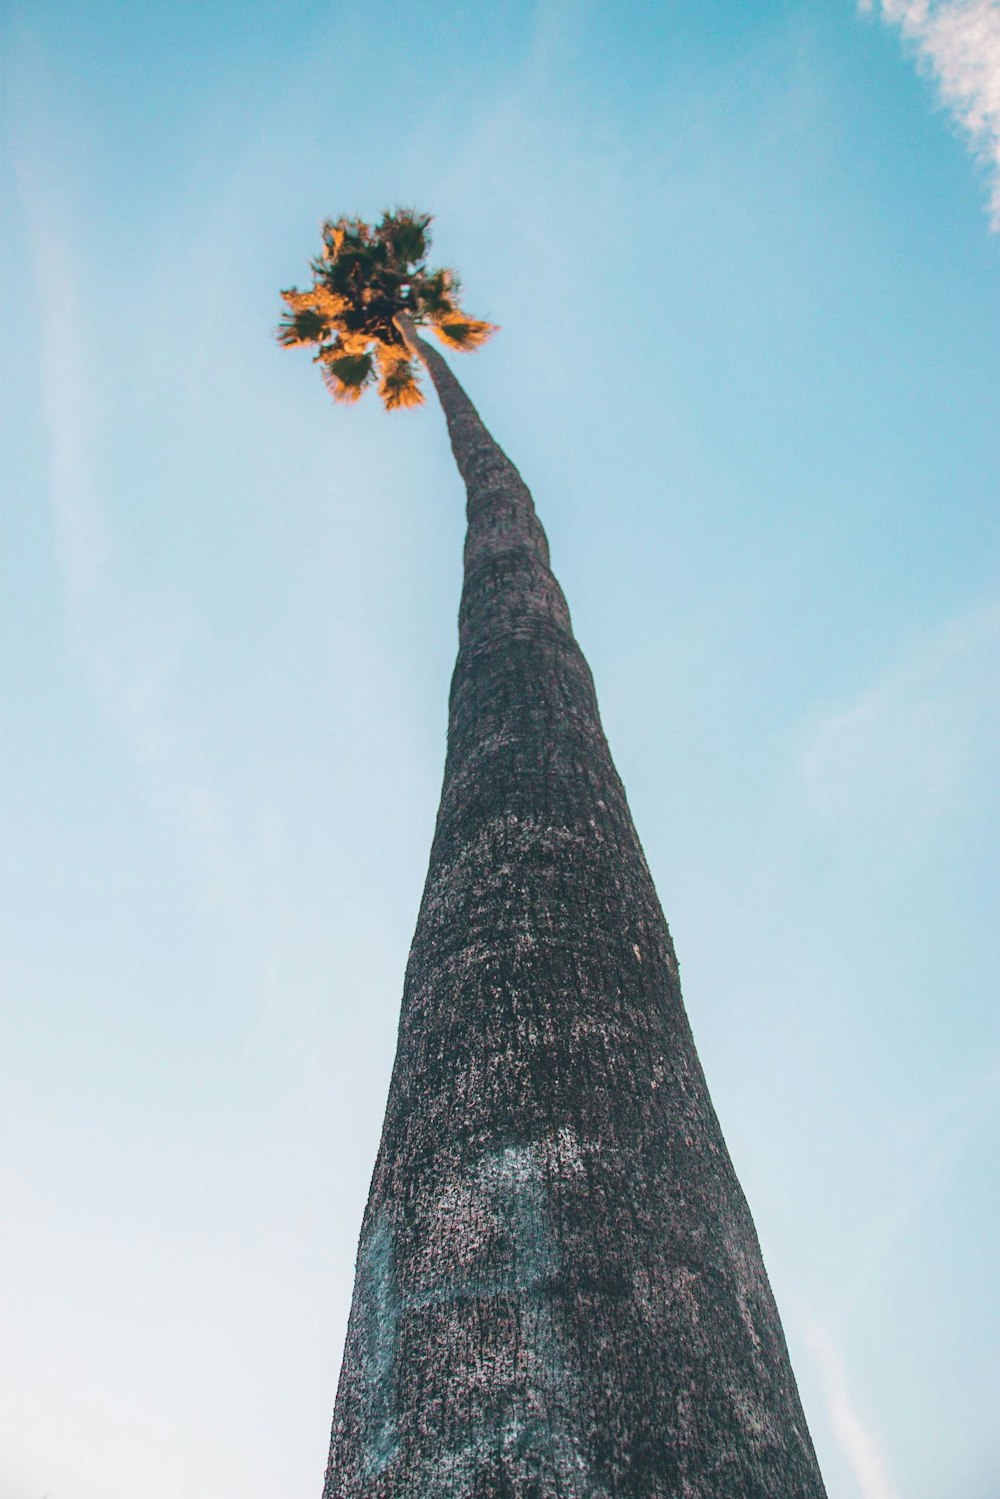 Tall Tree Pictures Download Free Images On Unsplash